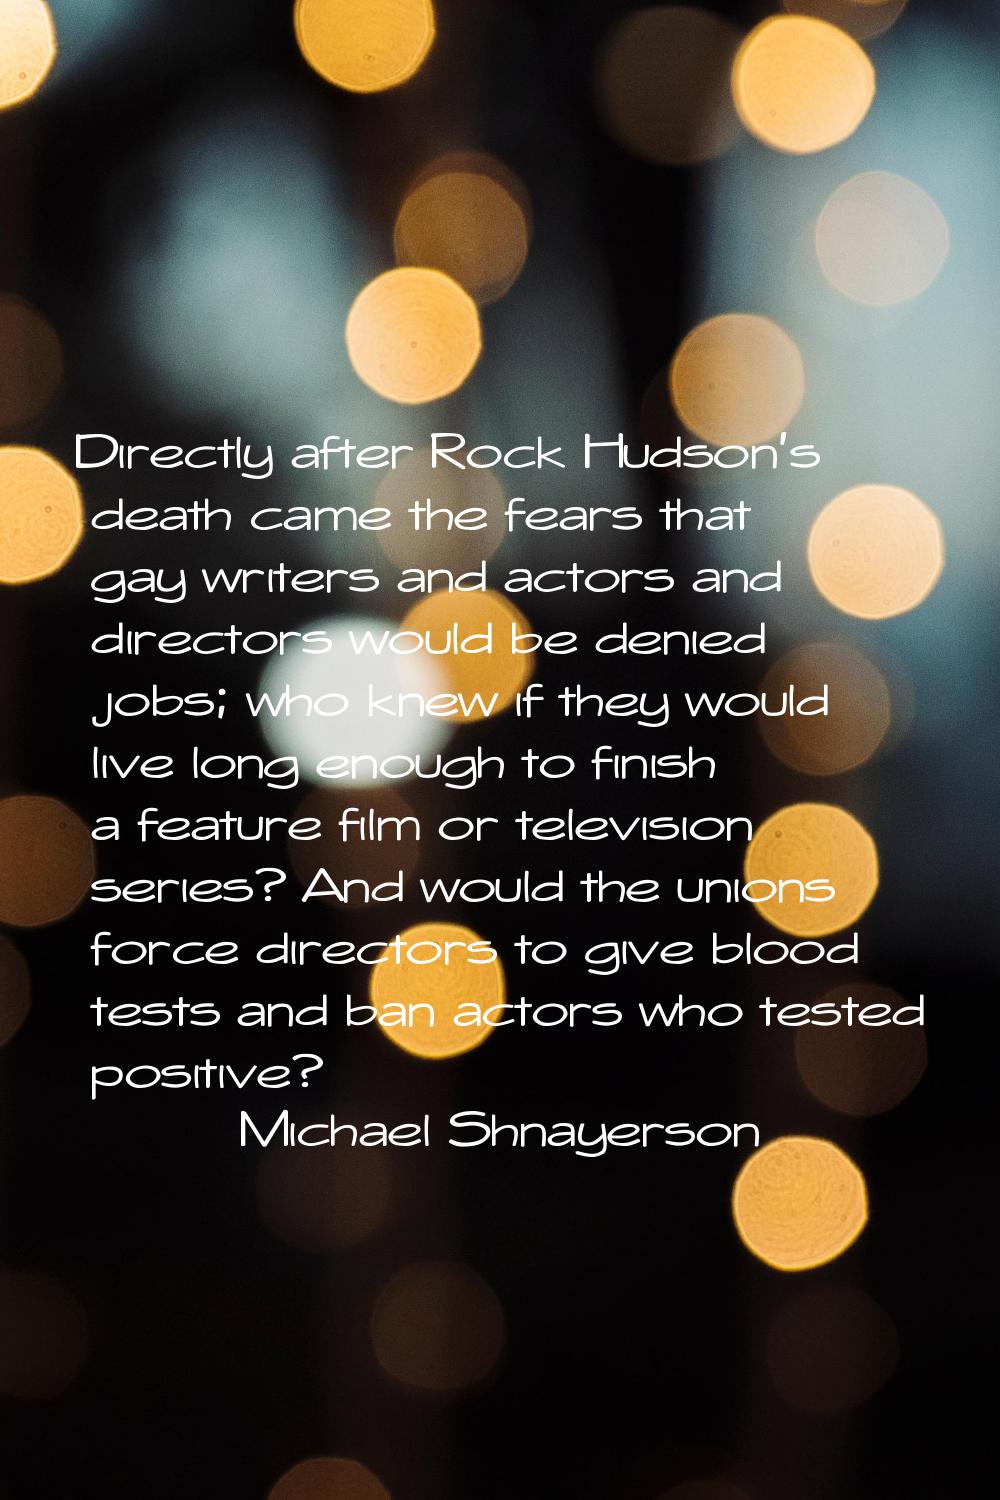 Directly after Rock Hudson's death came the fears that gay writers and actors and directors would b